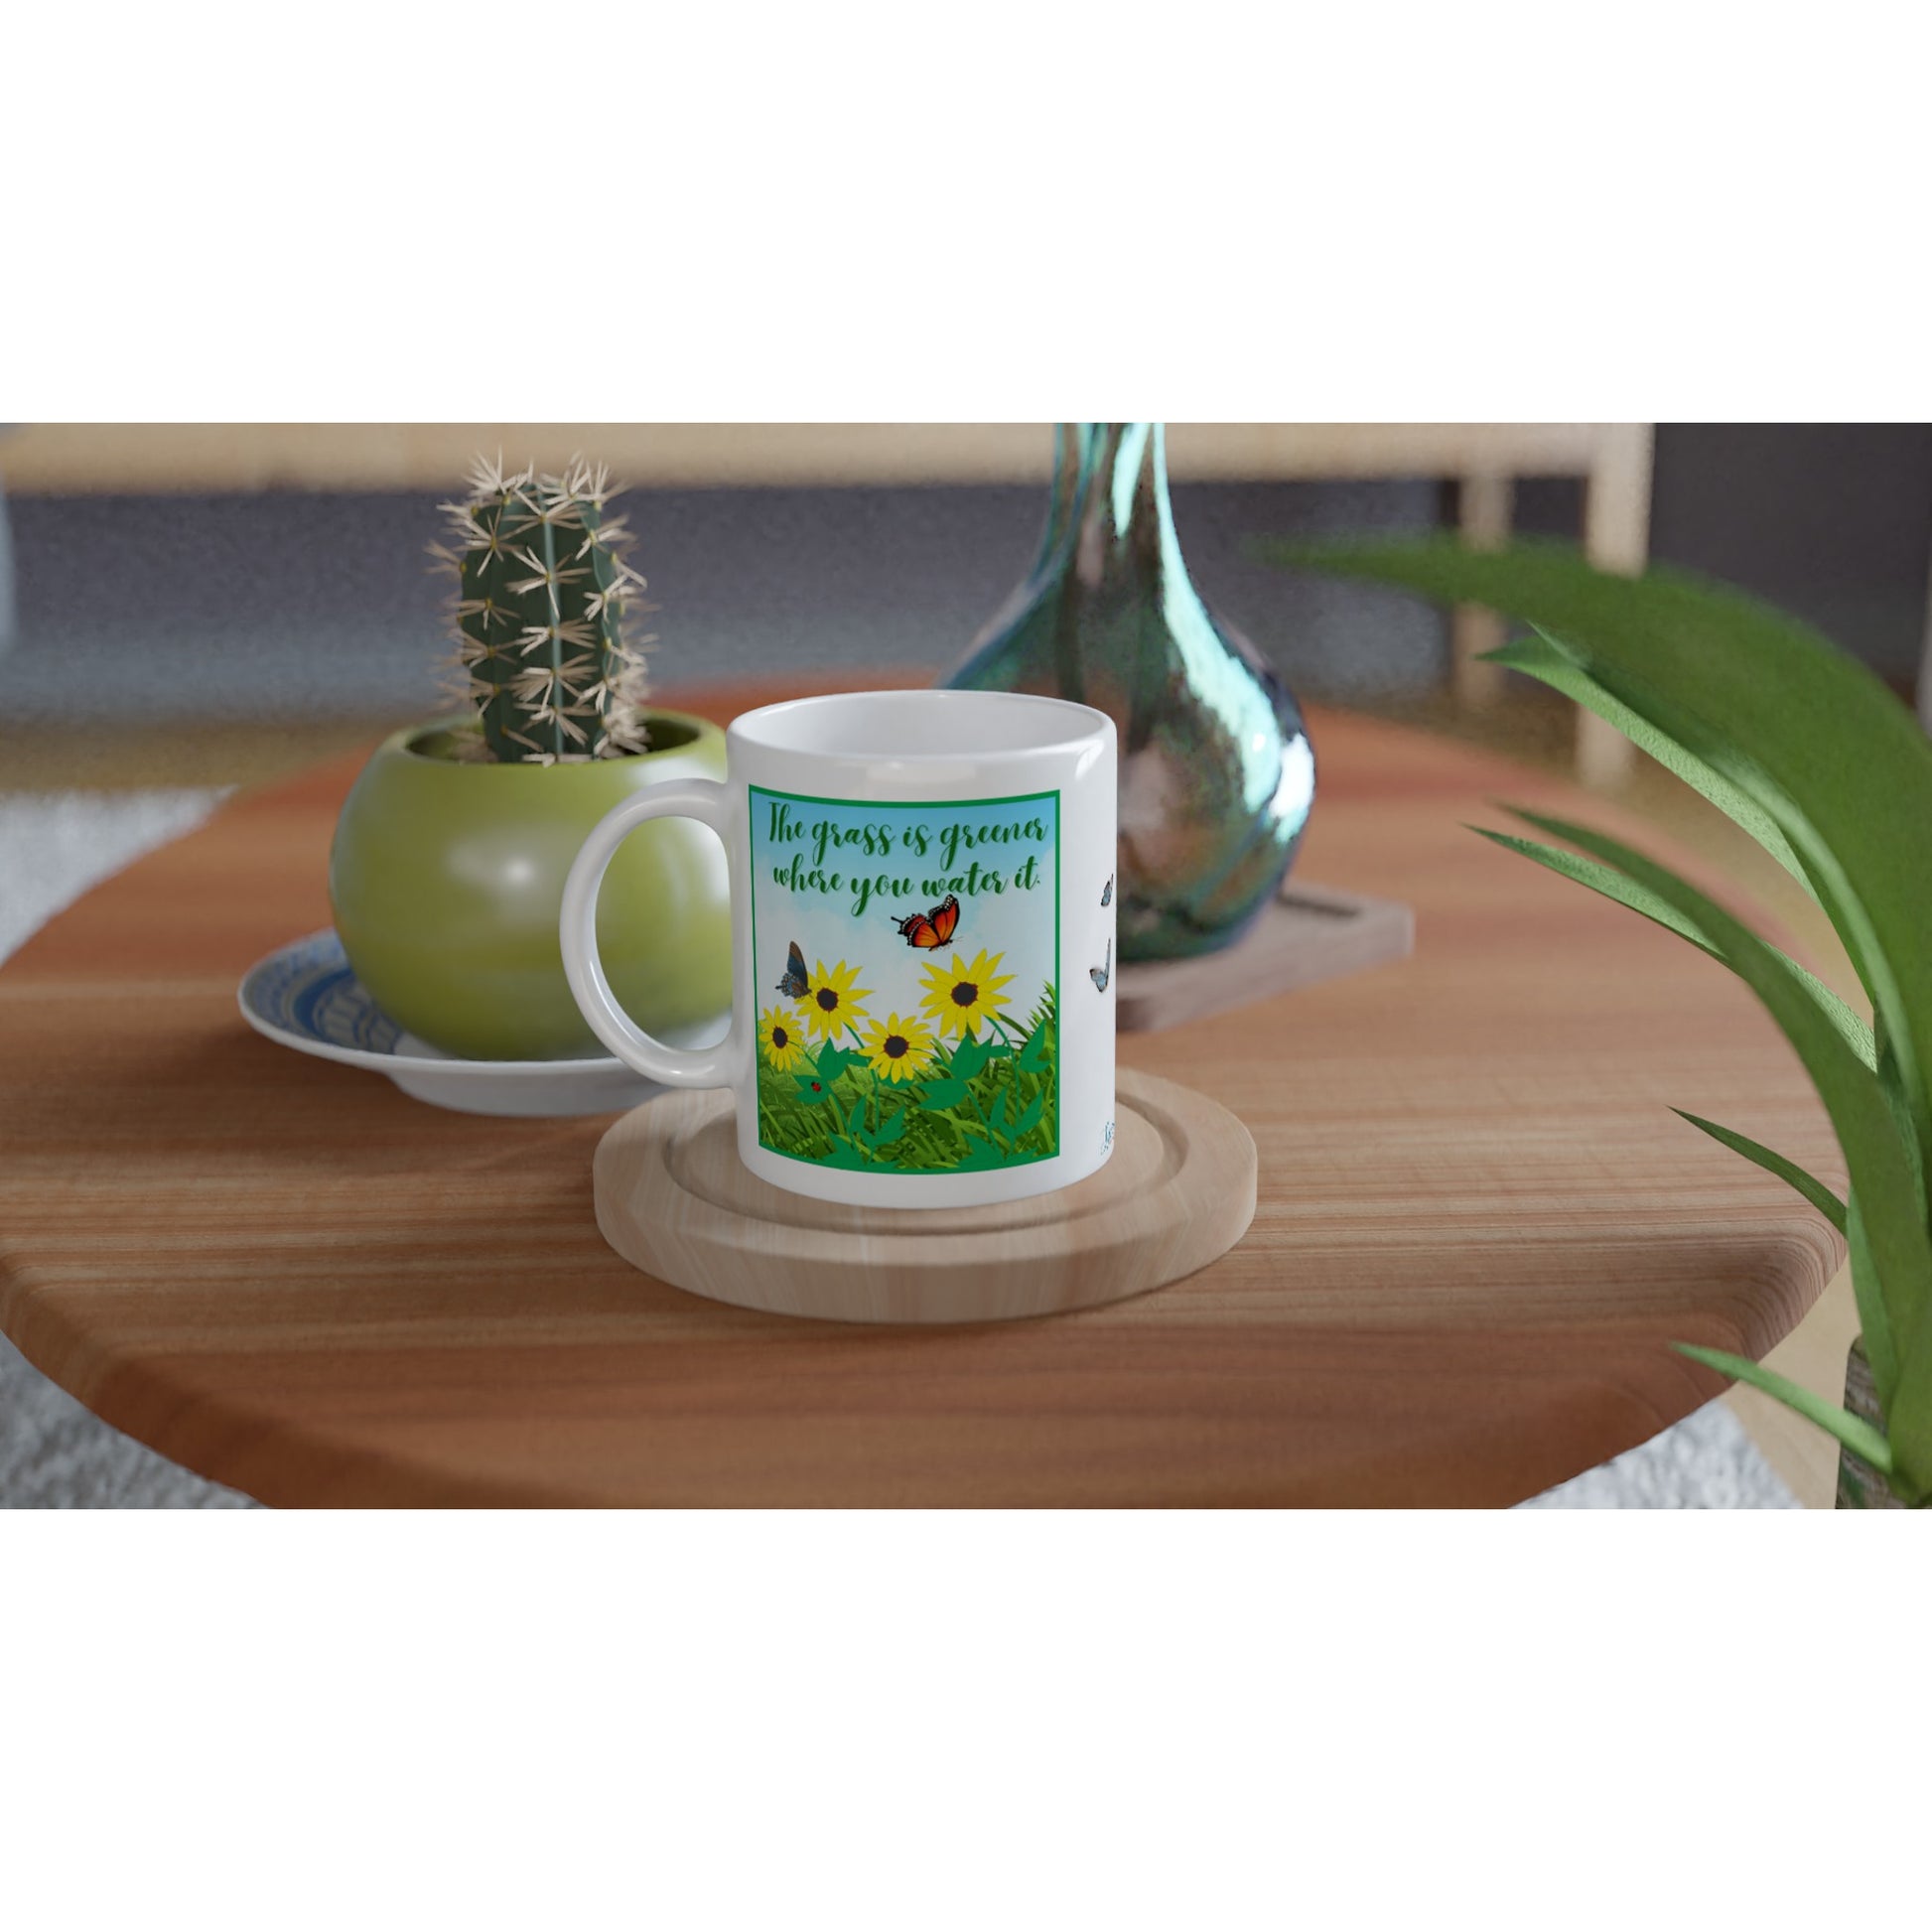 "The grass is greener where you water it." 11 oz. Mug on table